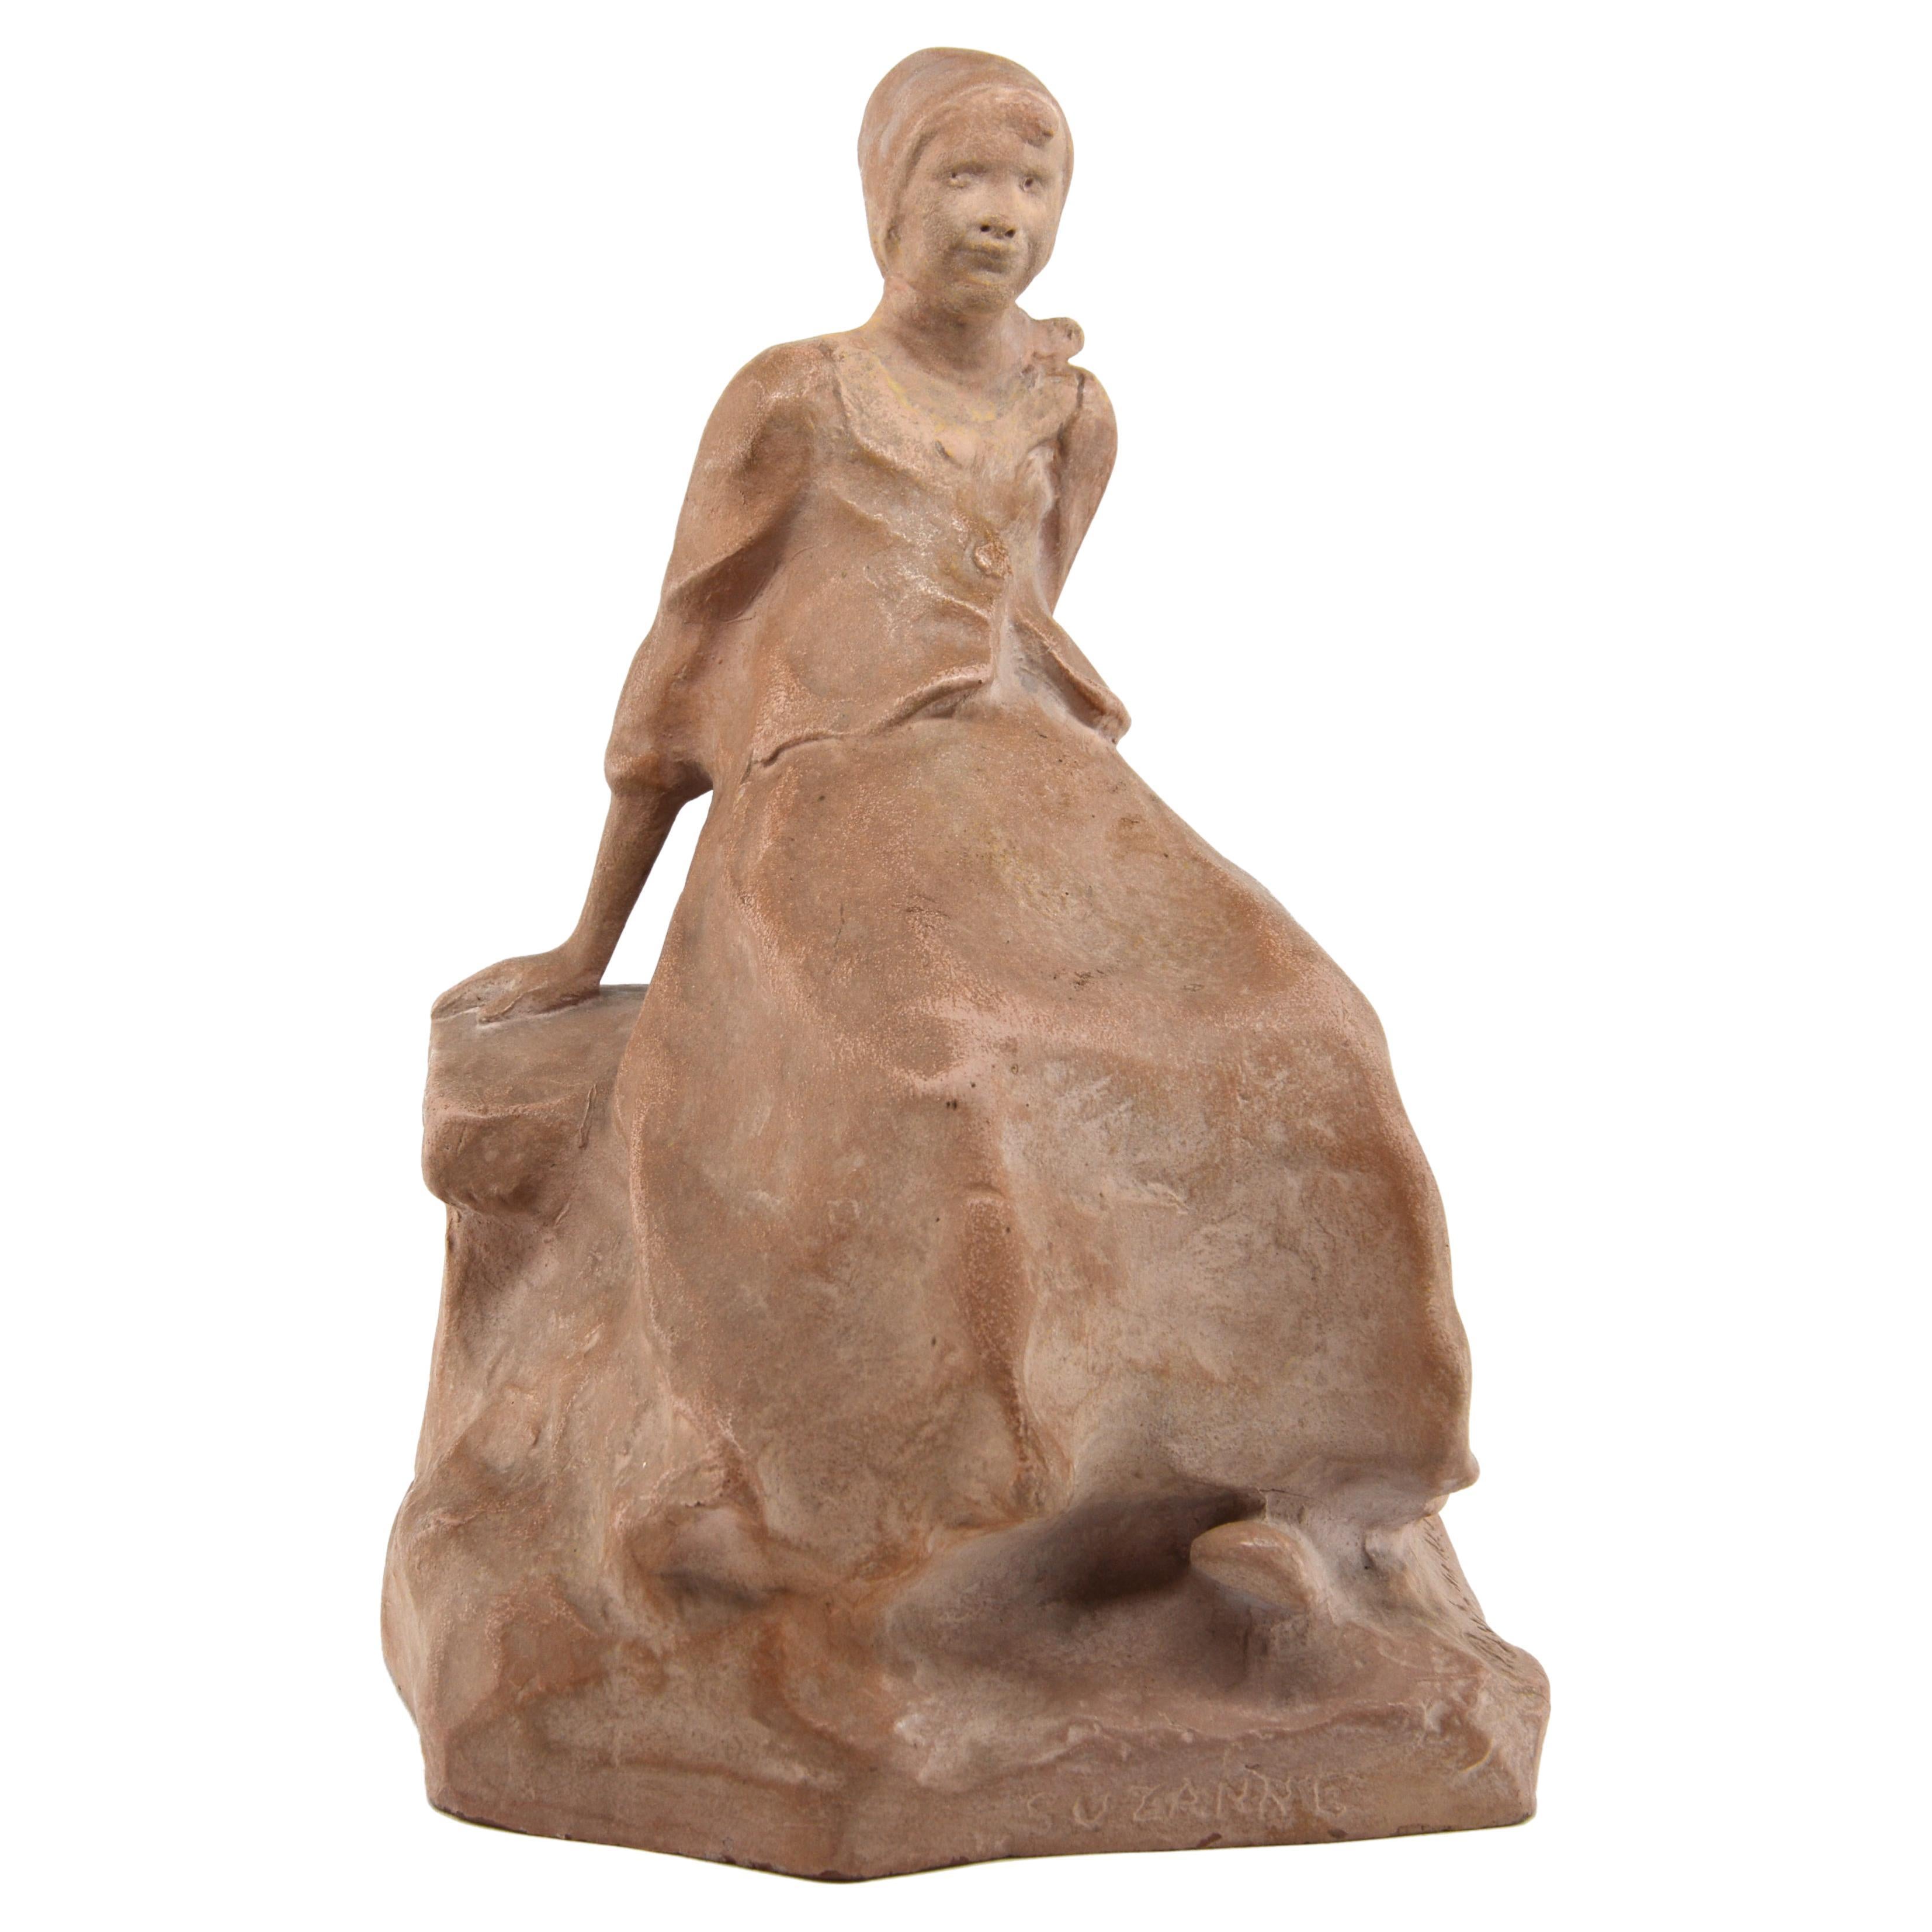 Ruth Milles French Art Deco Terracotta Statue, "Suzanne" Breton Character, 1927 For Sale